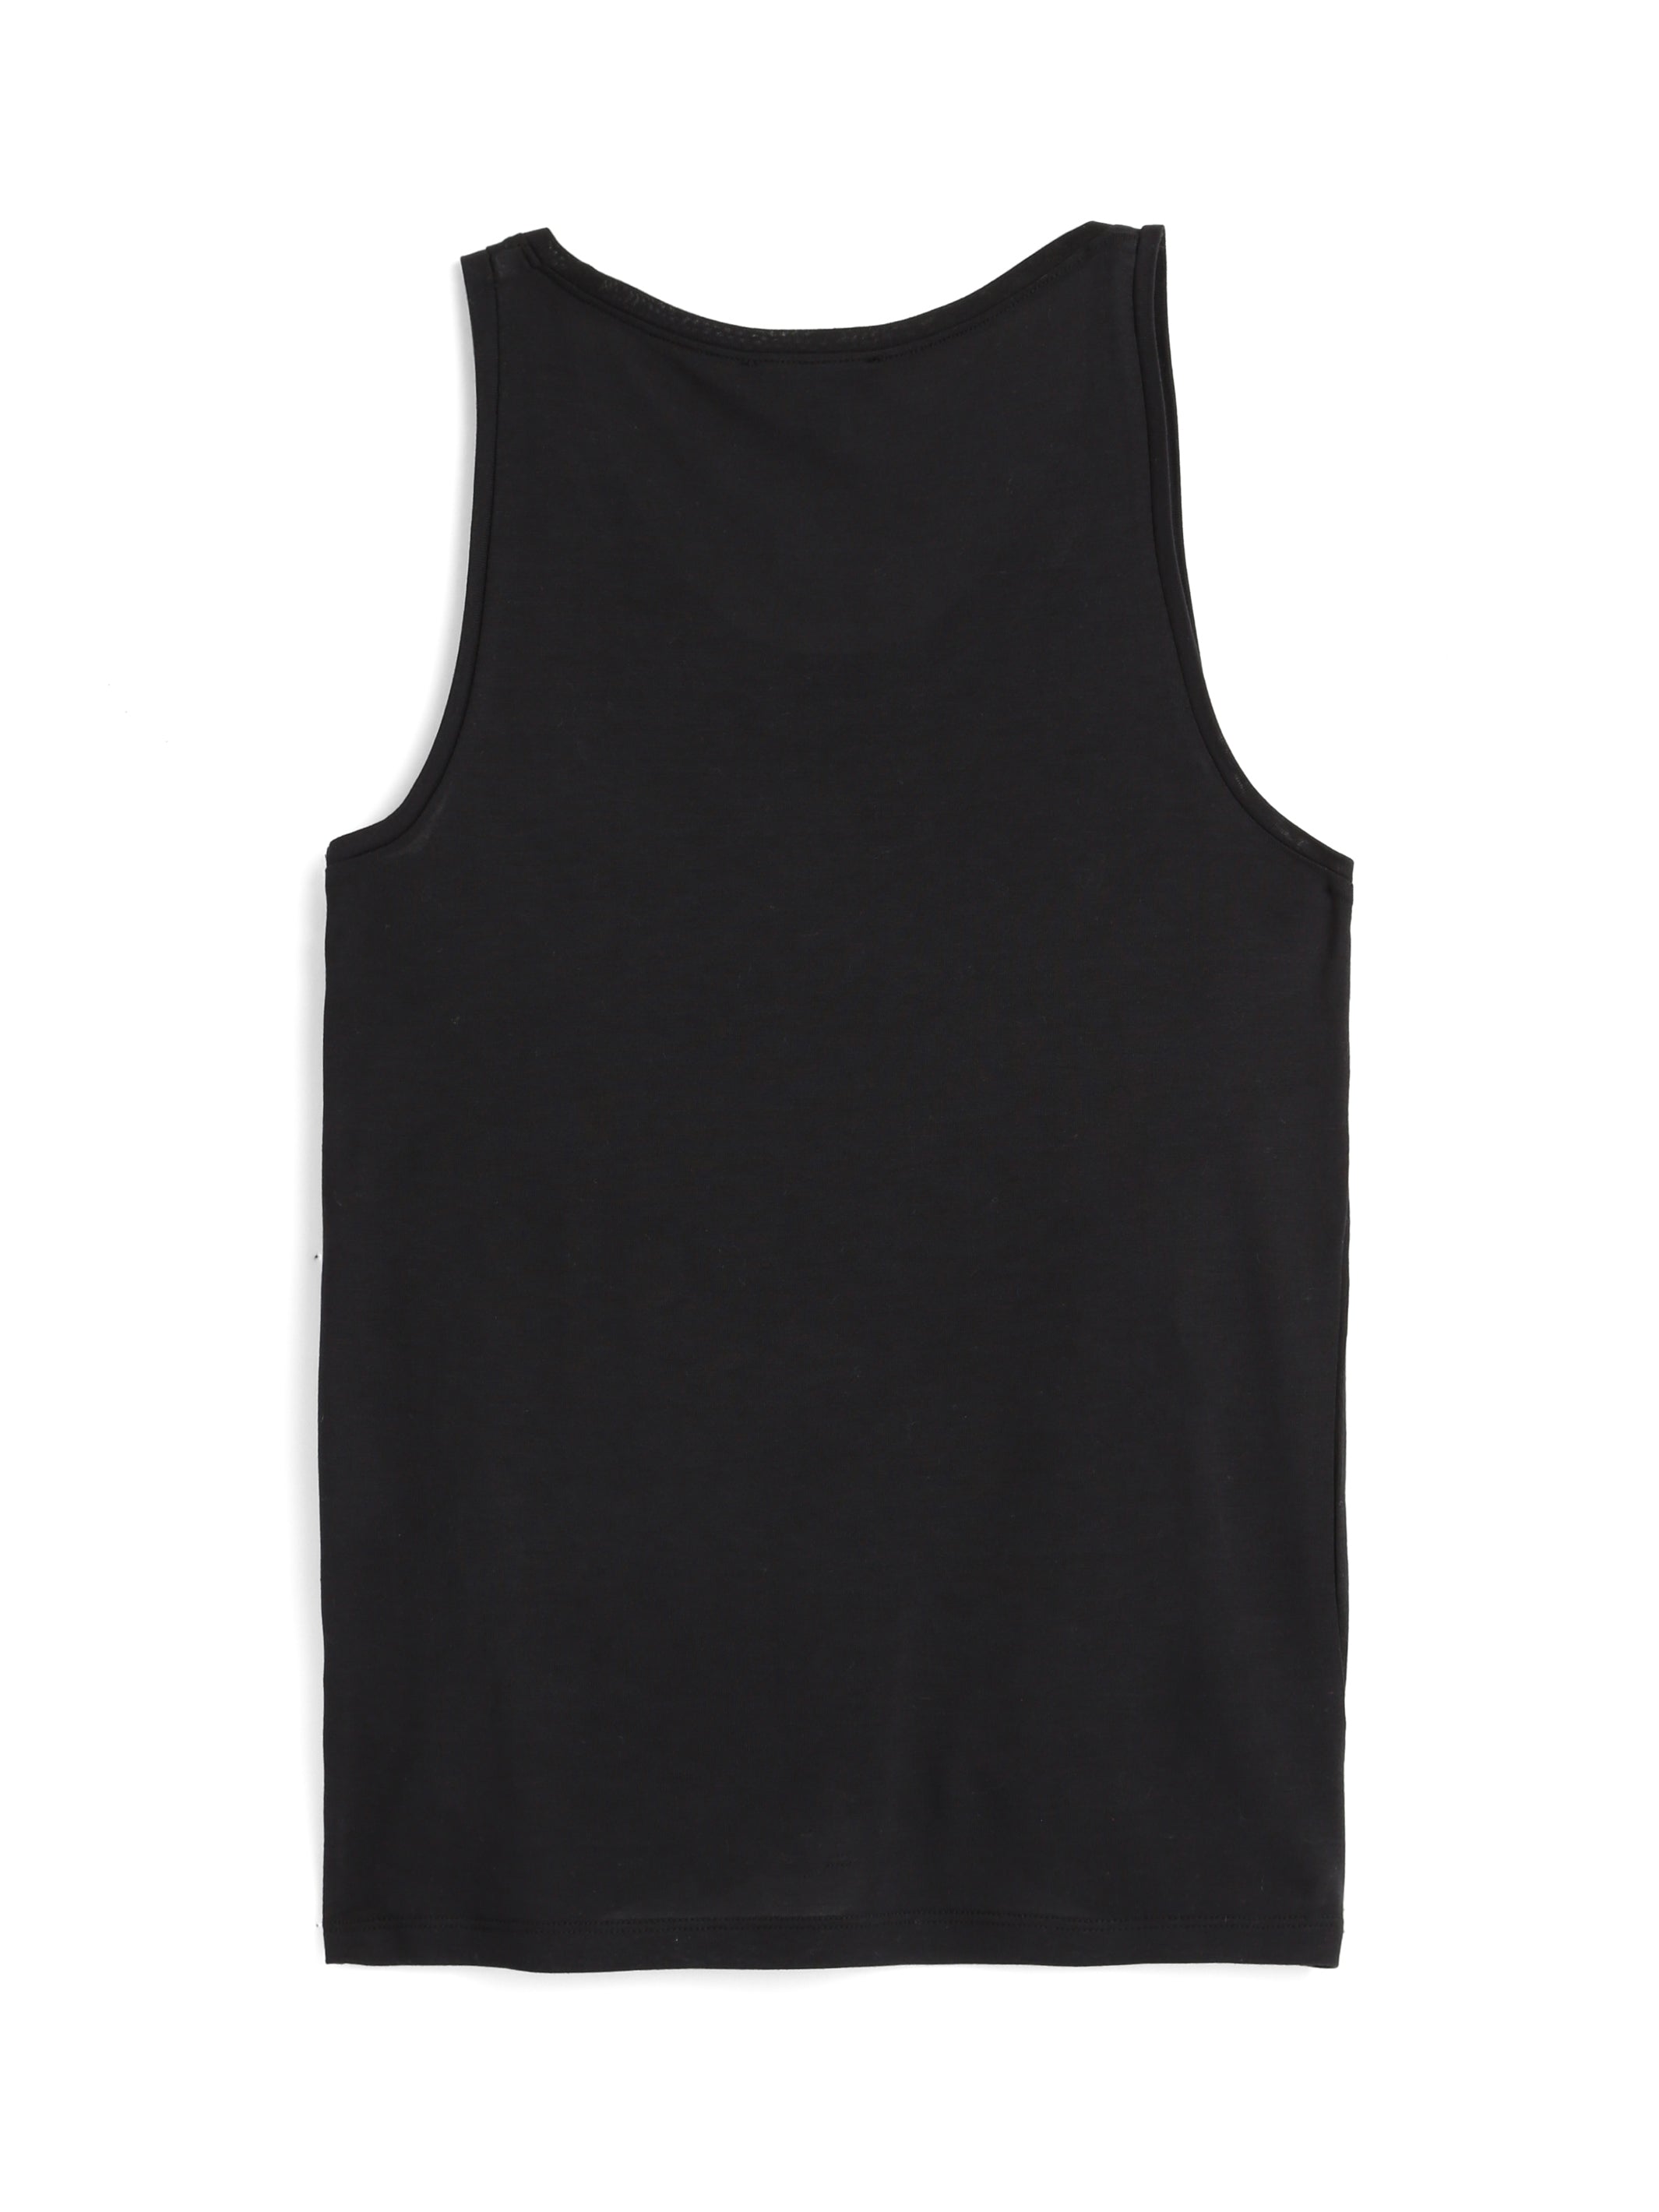 APT. 9 Women's S Tank Sleeveless Top Blouse with lace and embellished black  - AbuMaizar Dental Roots Clinic